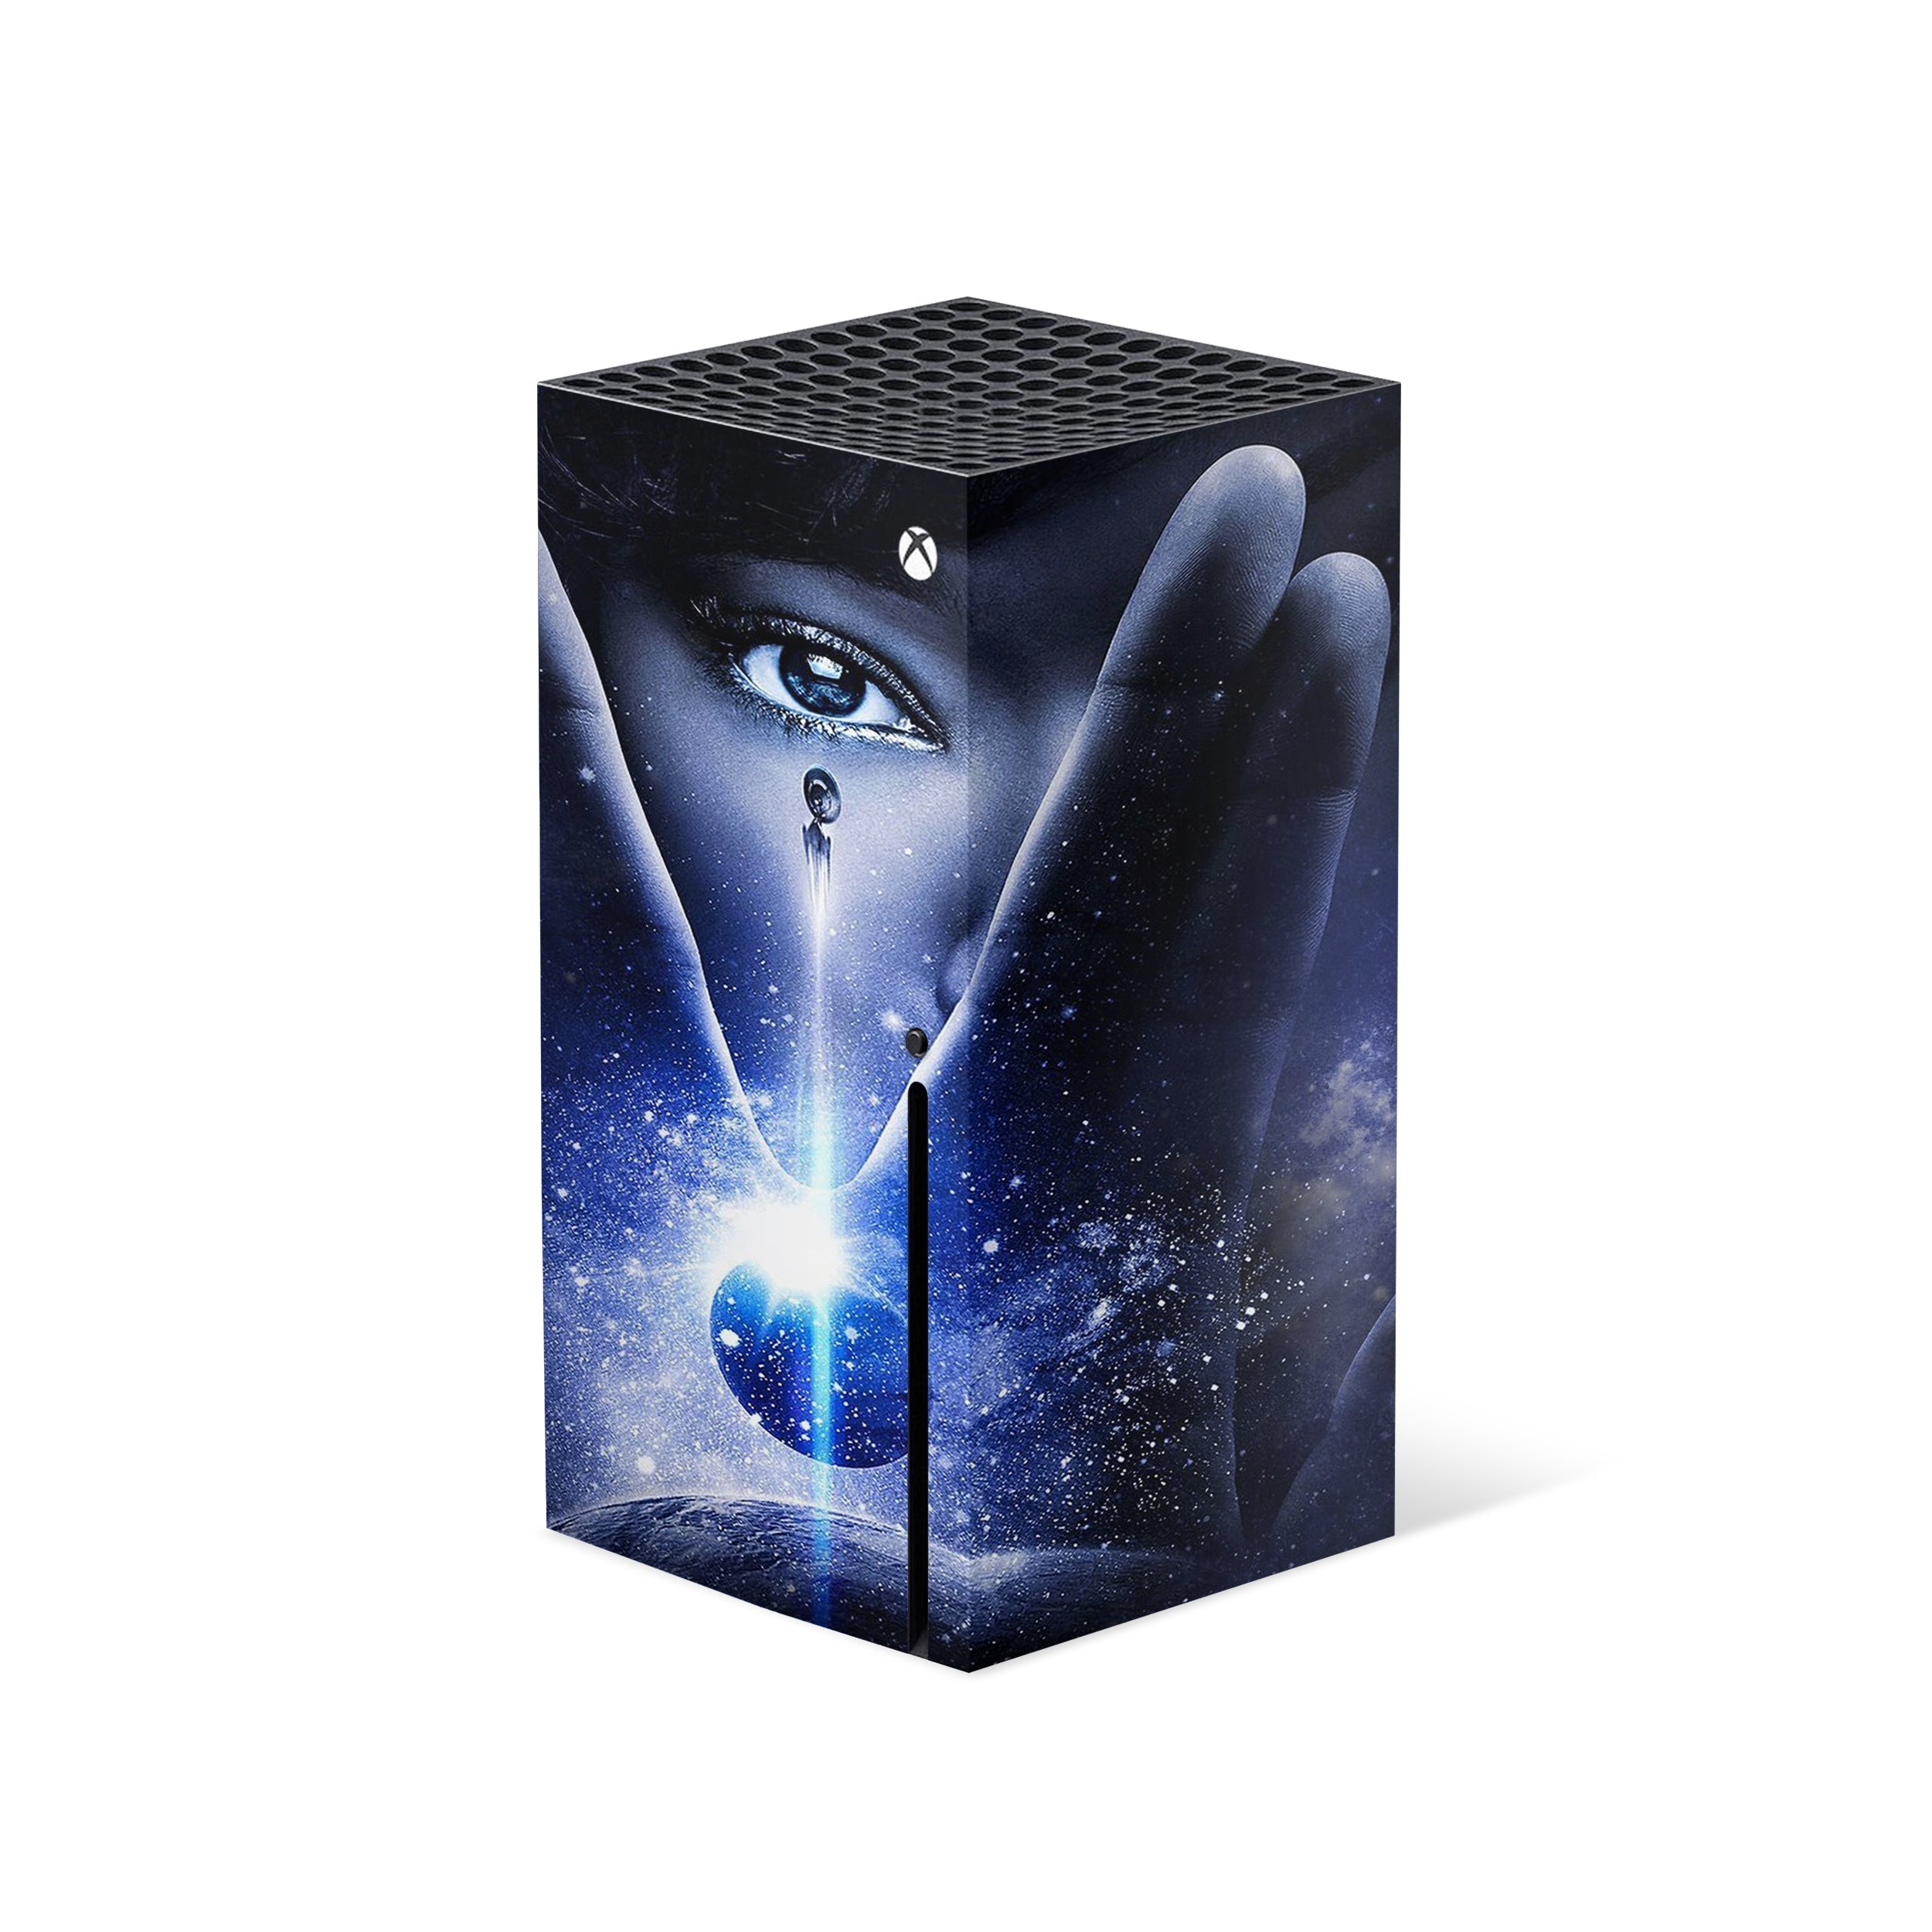 A video game skin featuring a Star Trek Discovery design for the Xbox Series X.